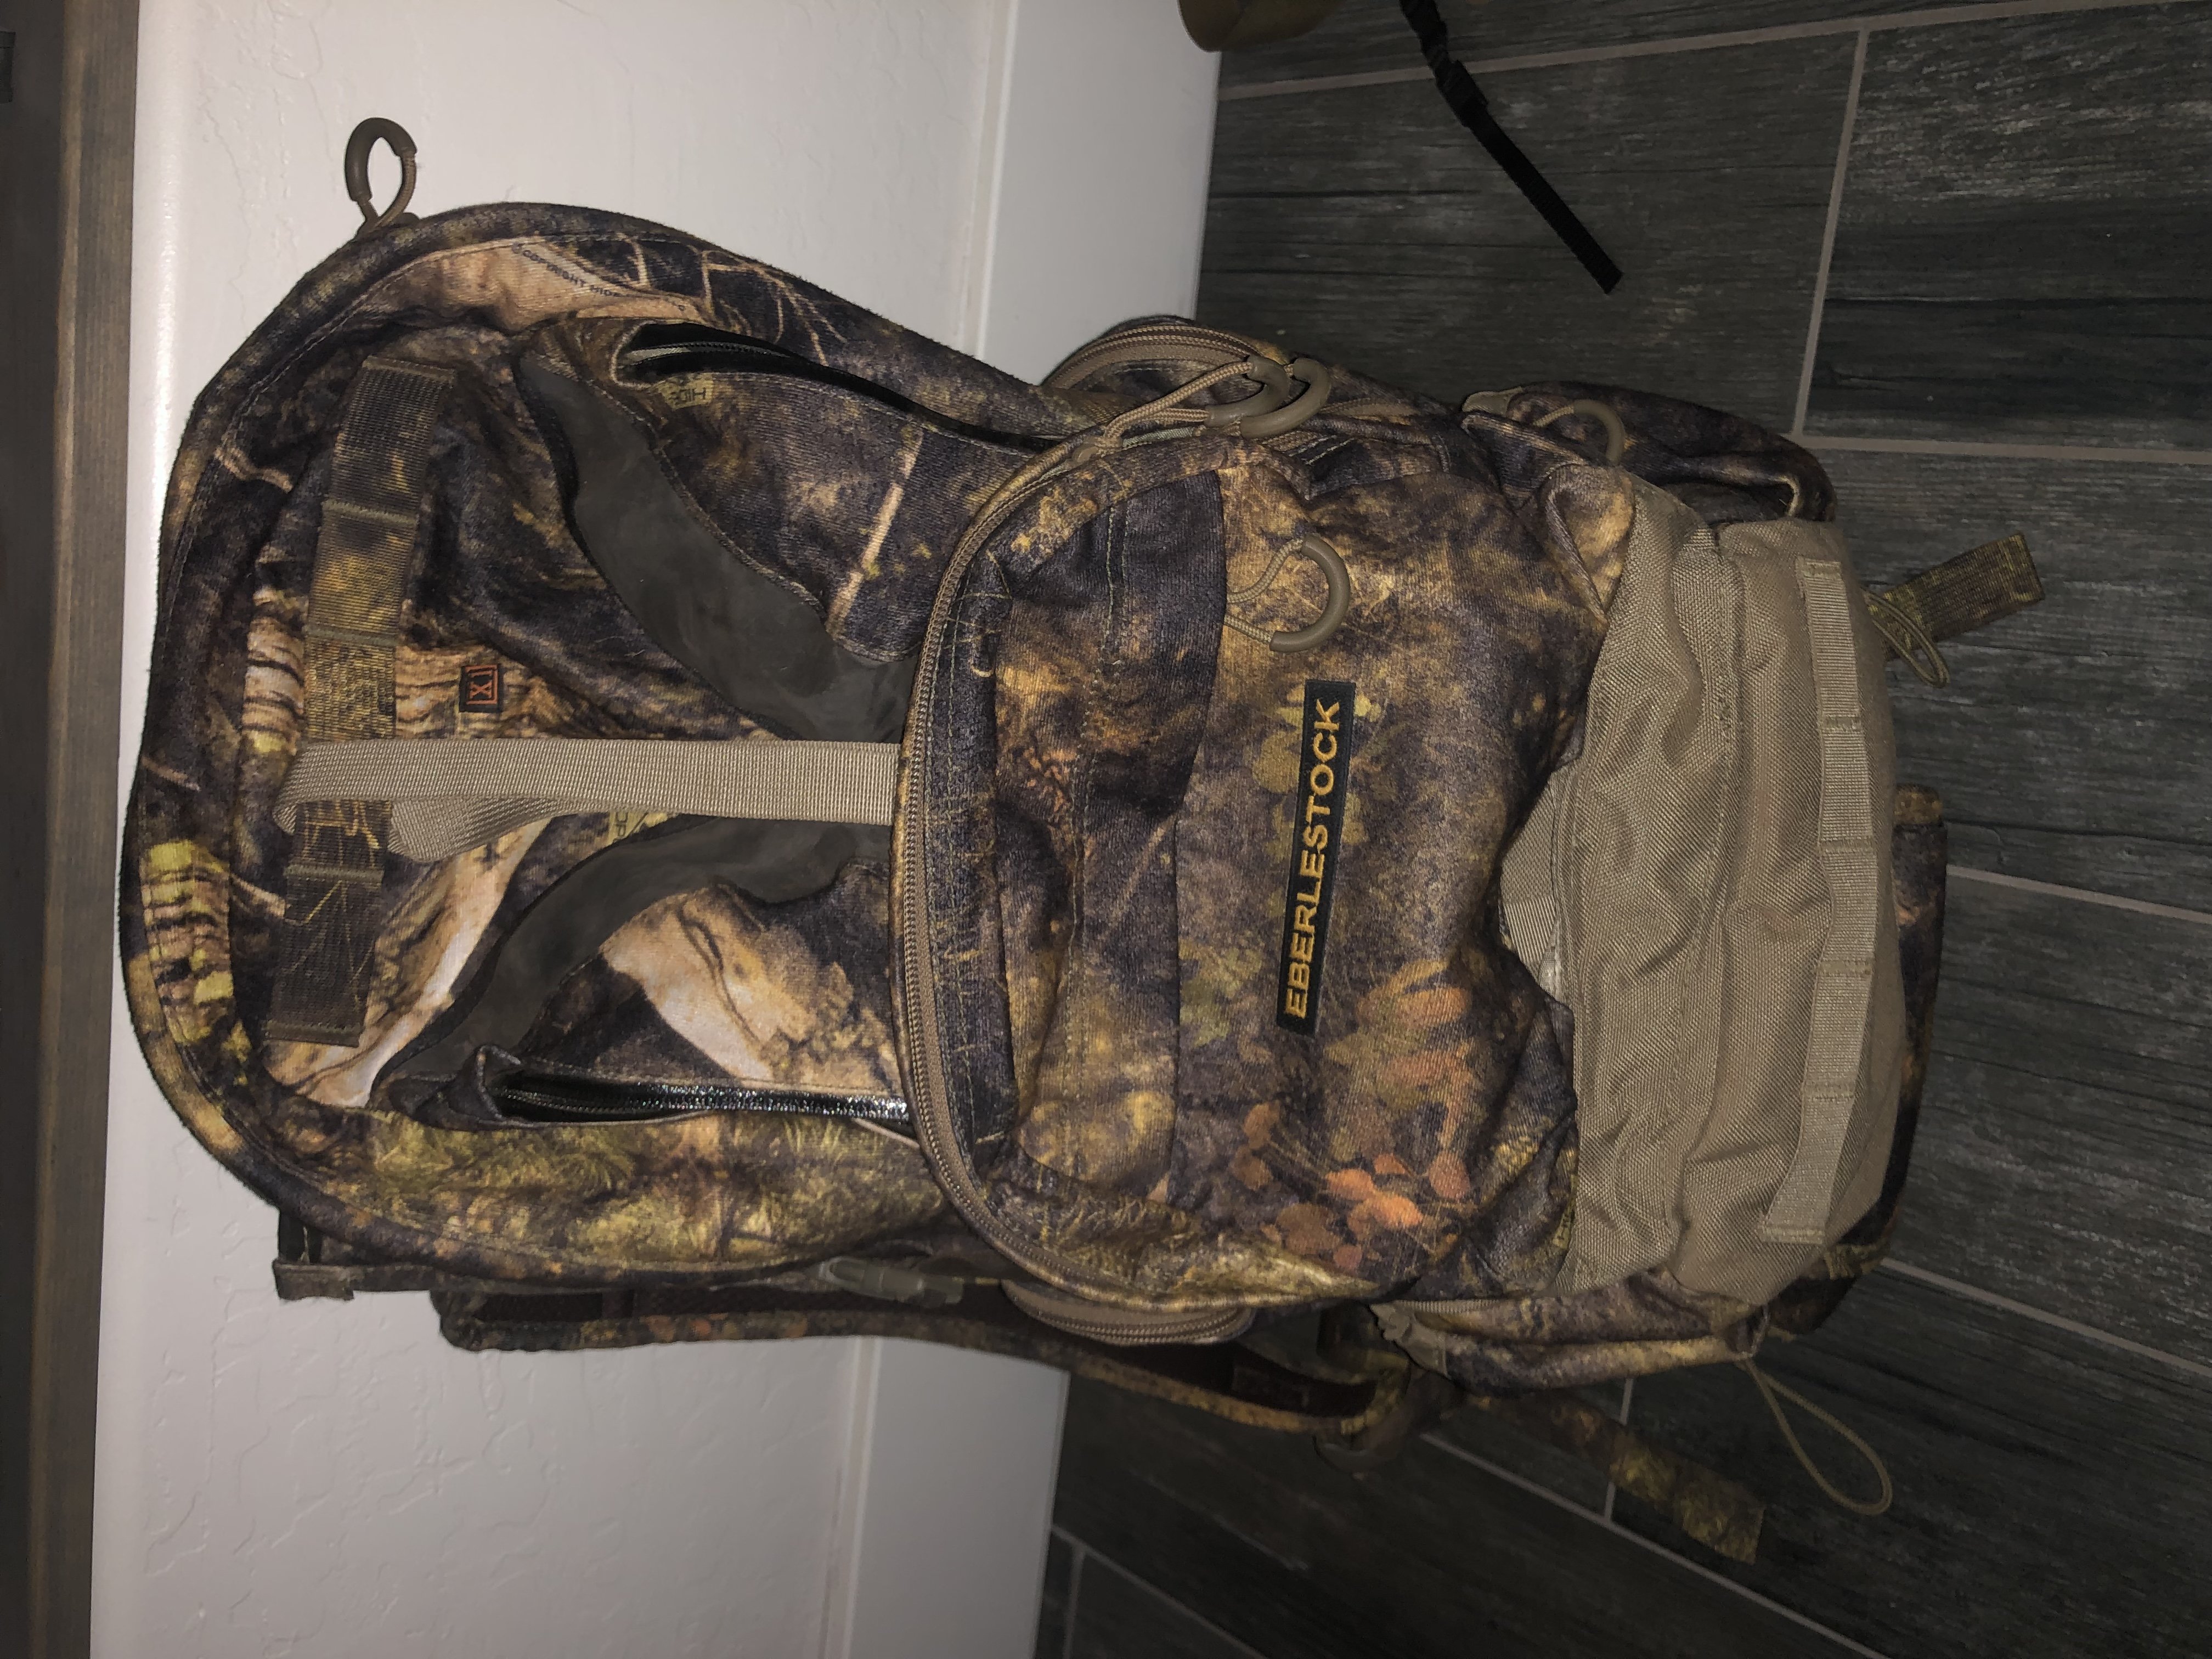 SOLD Eberlestock X1A1 pack $150 - Classified Ads - CouesWhitetail.com ...